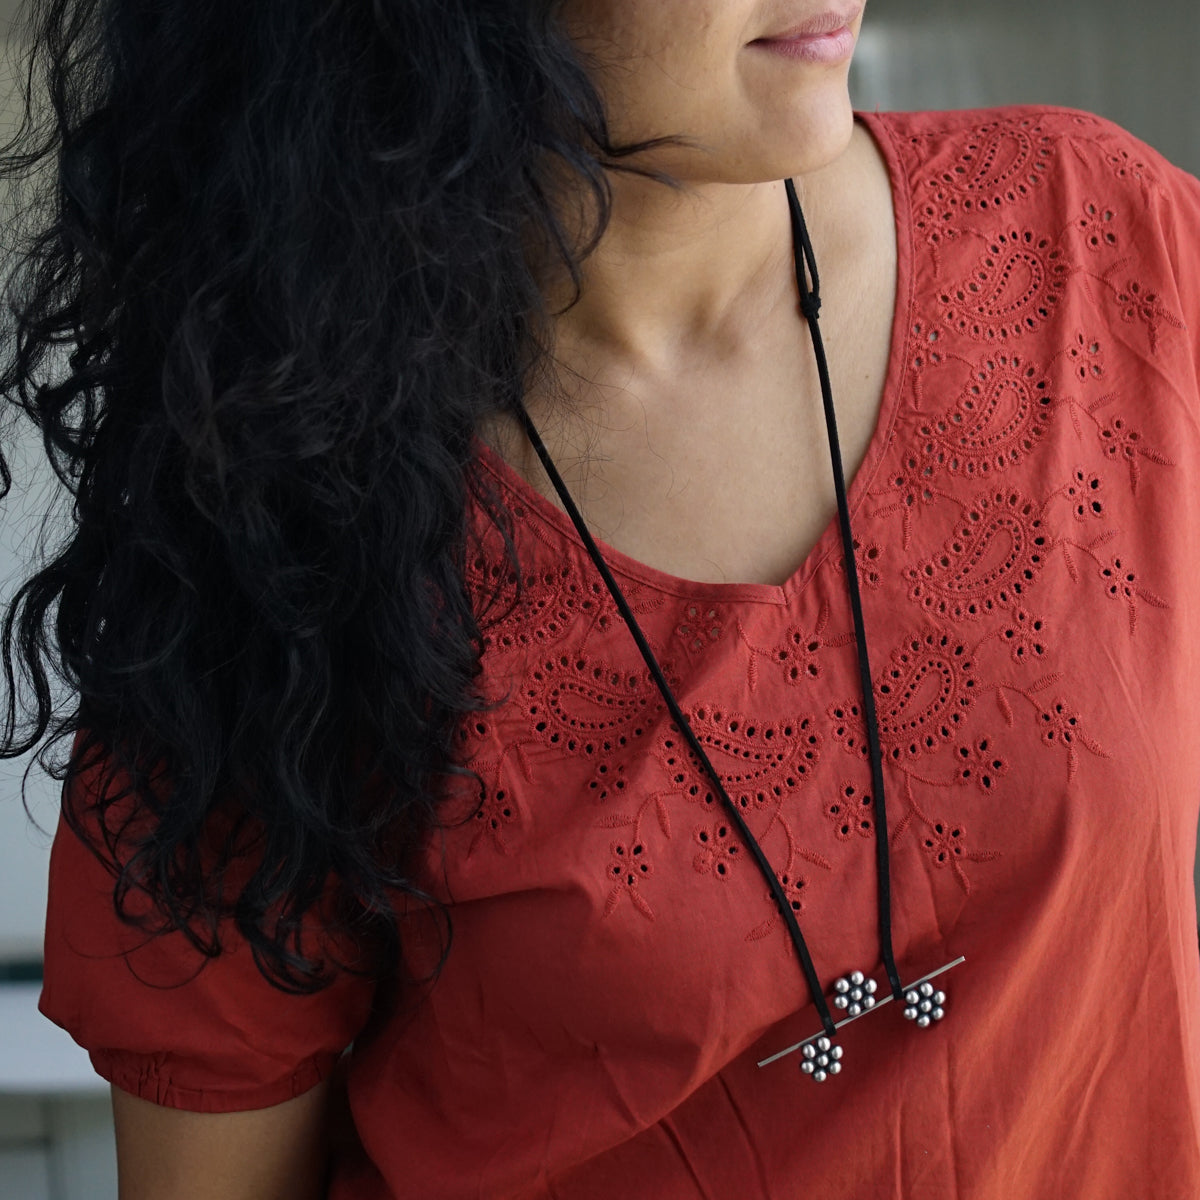 a woman wearing a red shirt and a black necklace